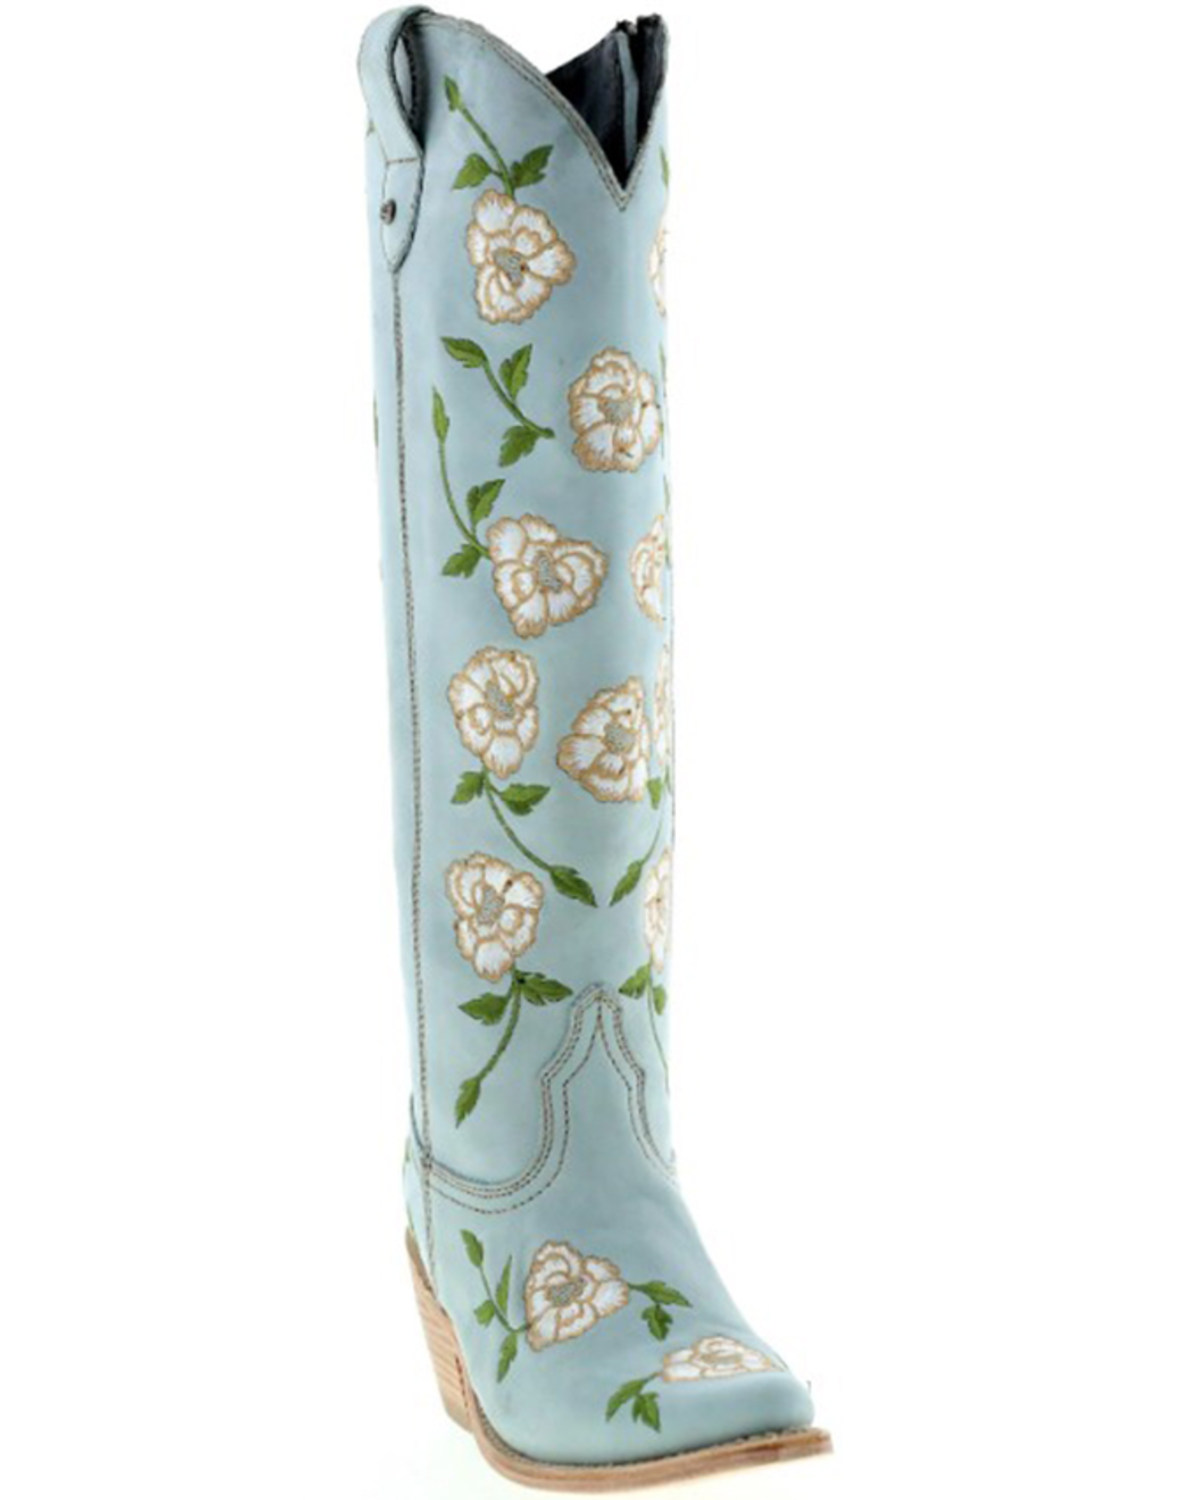 Botas Caborca For Liberty Black Women's Embroidered Roses Tall Western Boots - Snip Toe